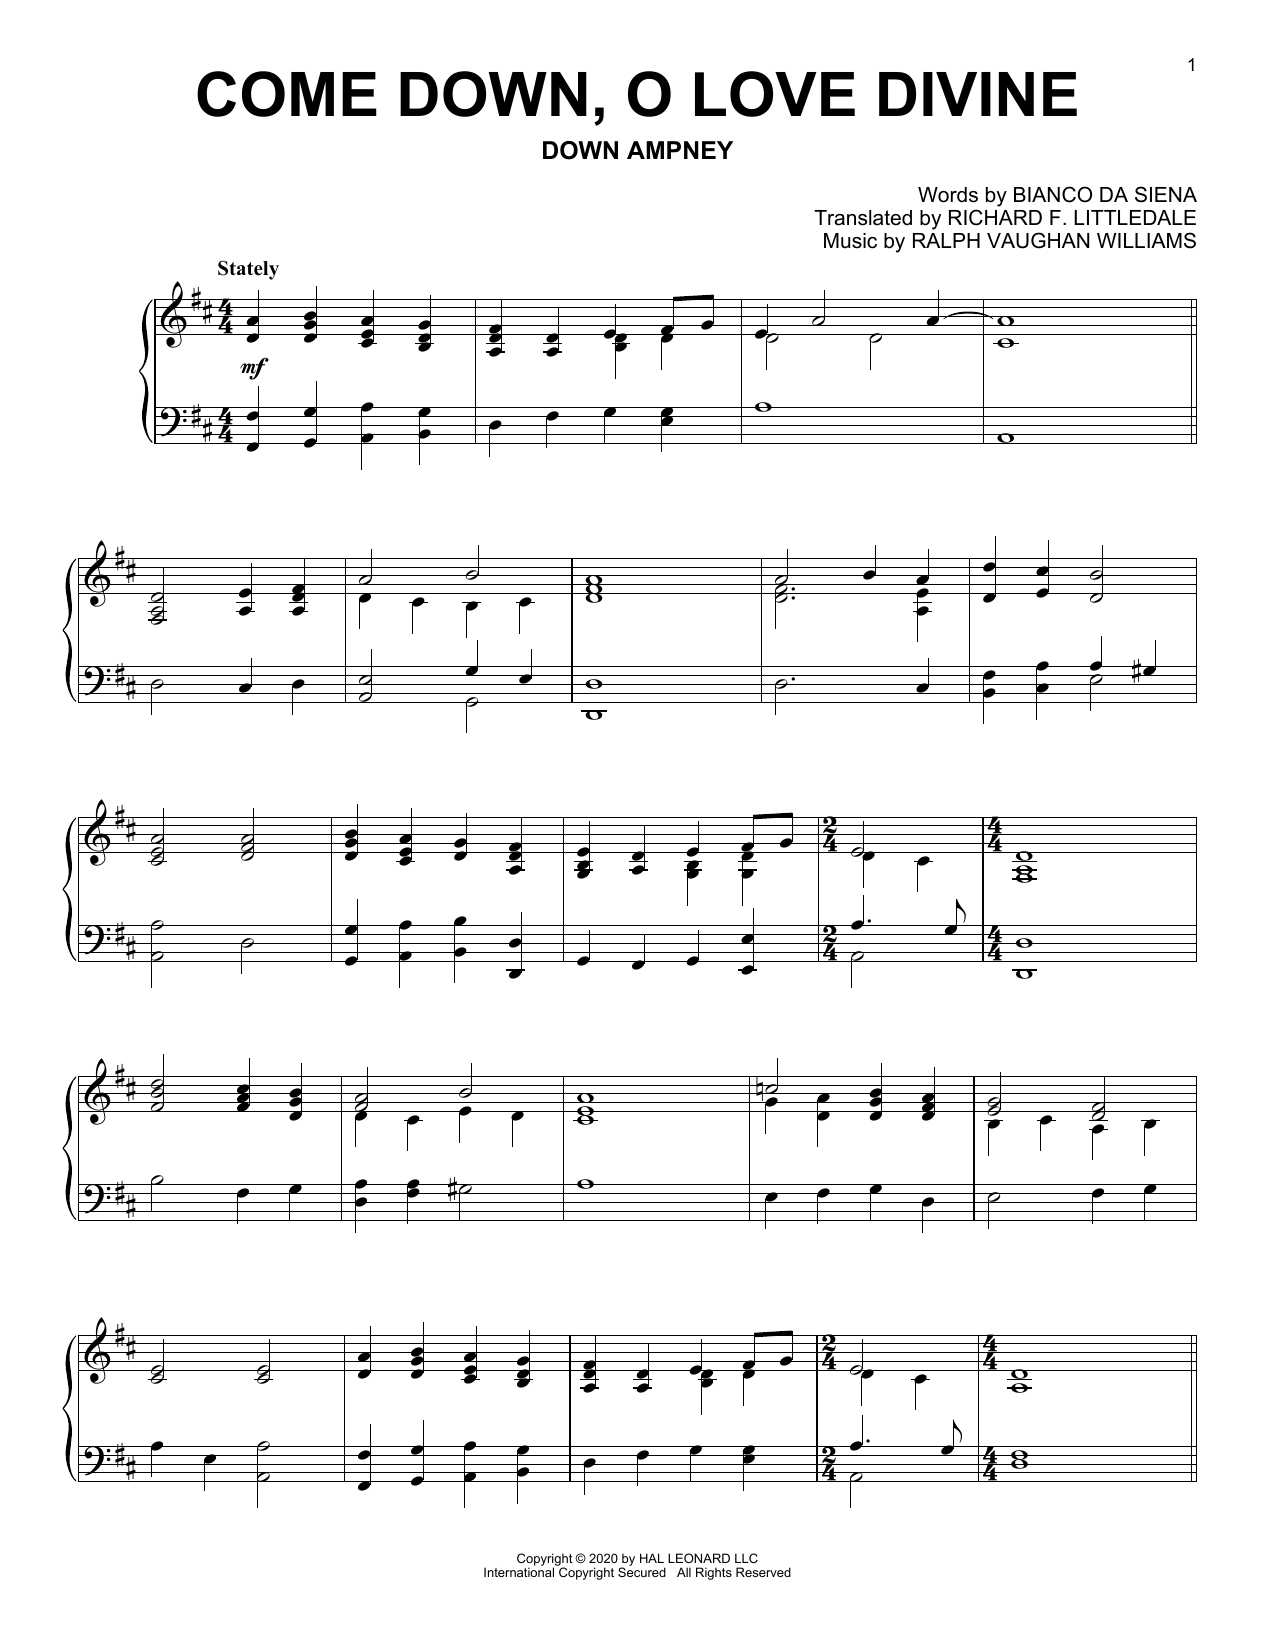 Download Bianco da Siena and Ralph Vaughan Wi Come Down, O Love Divine Sheet Music